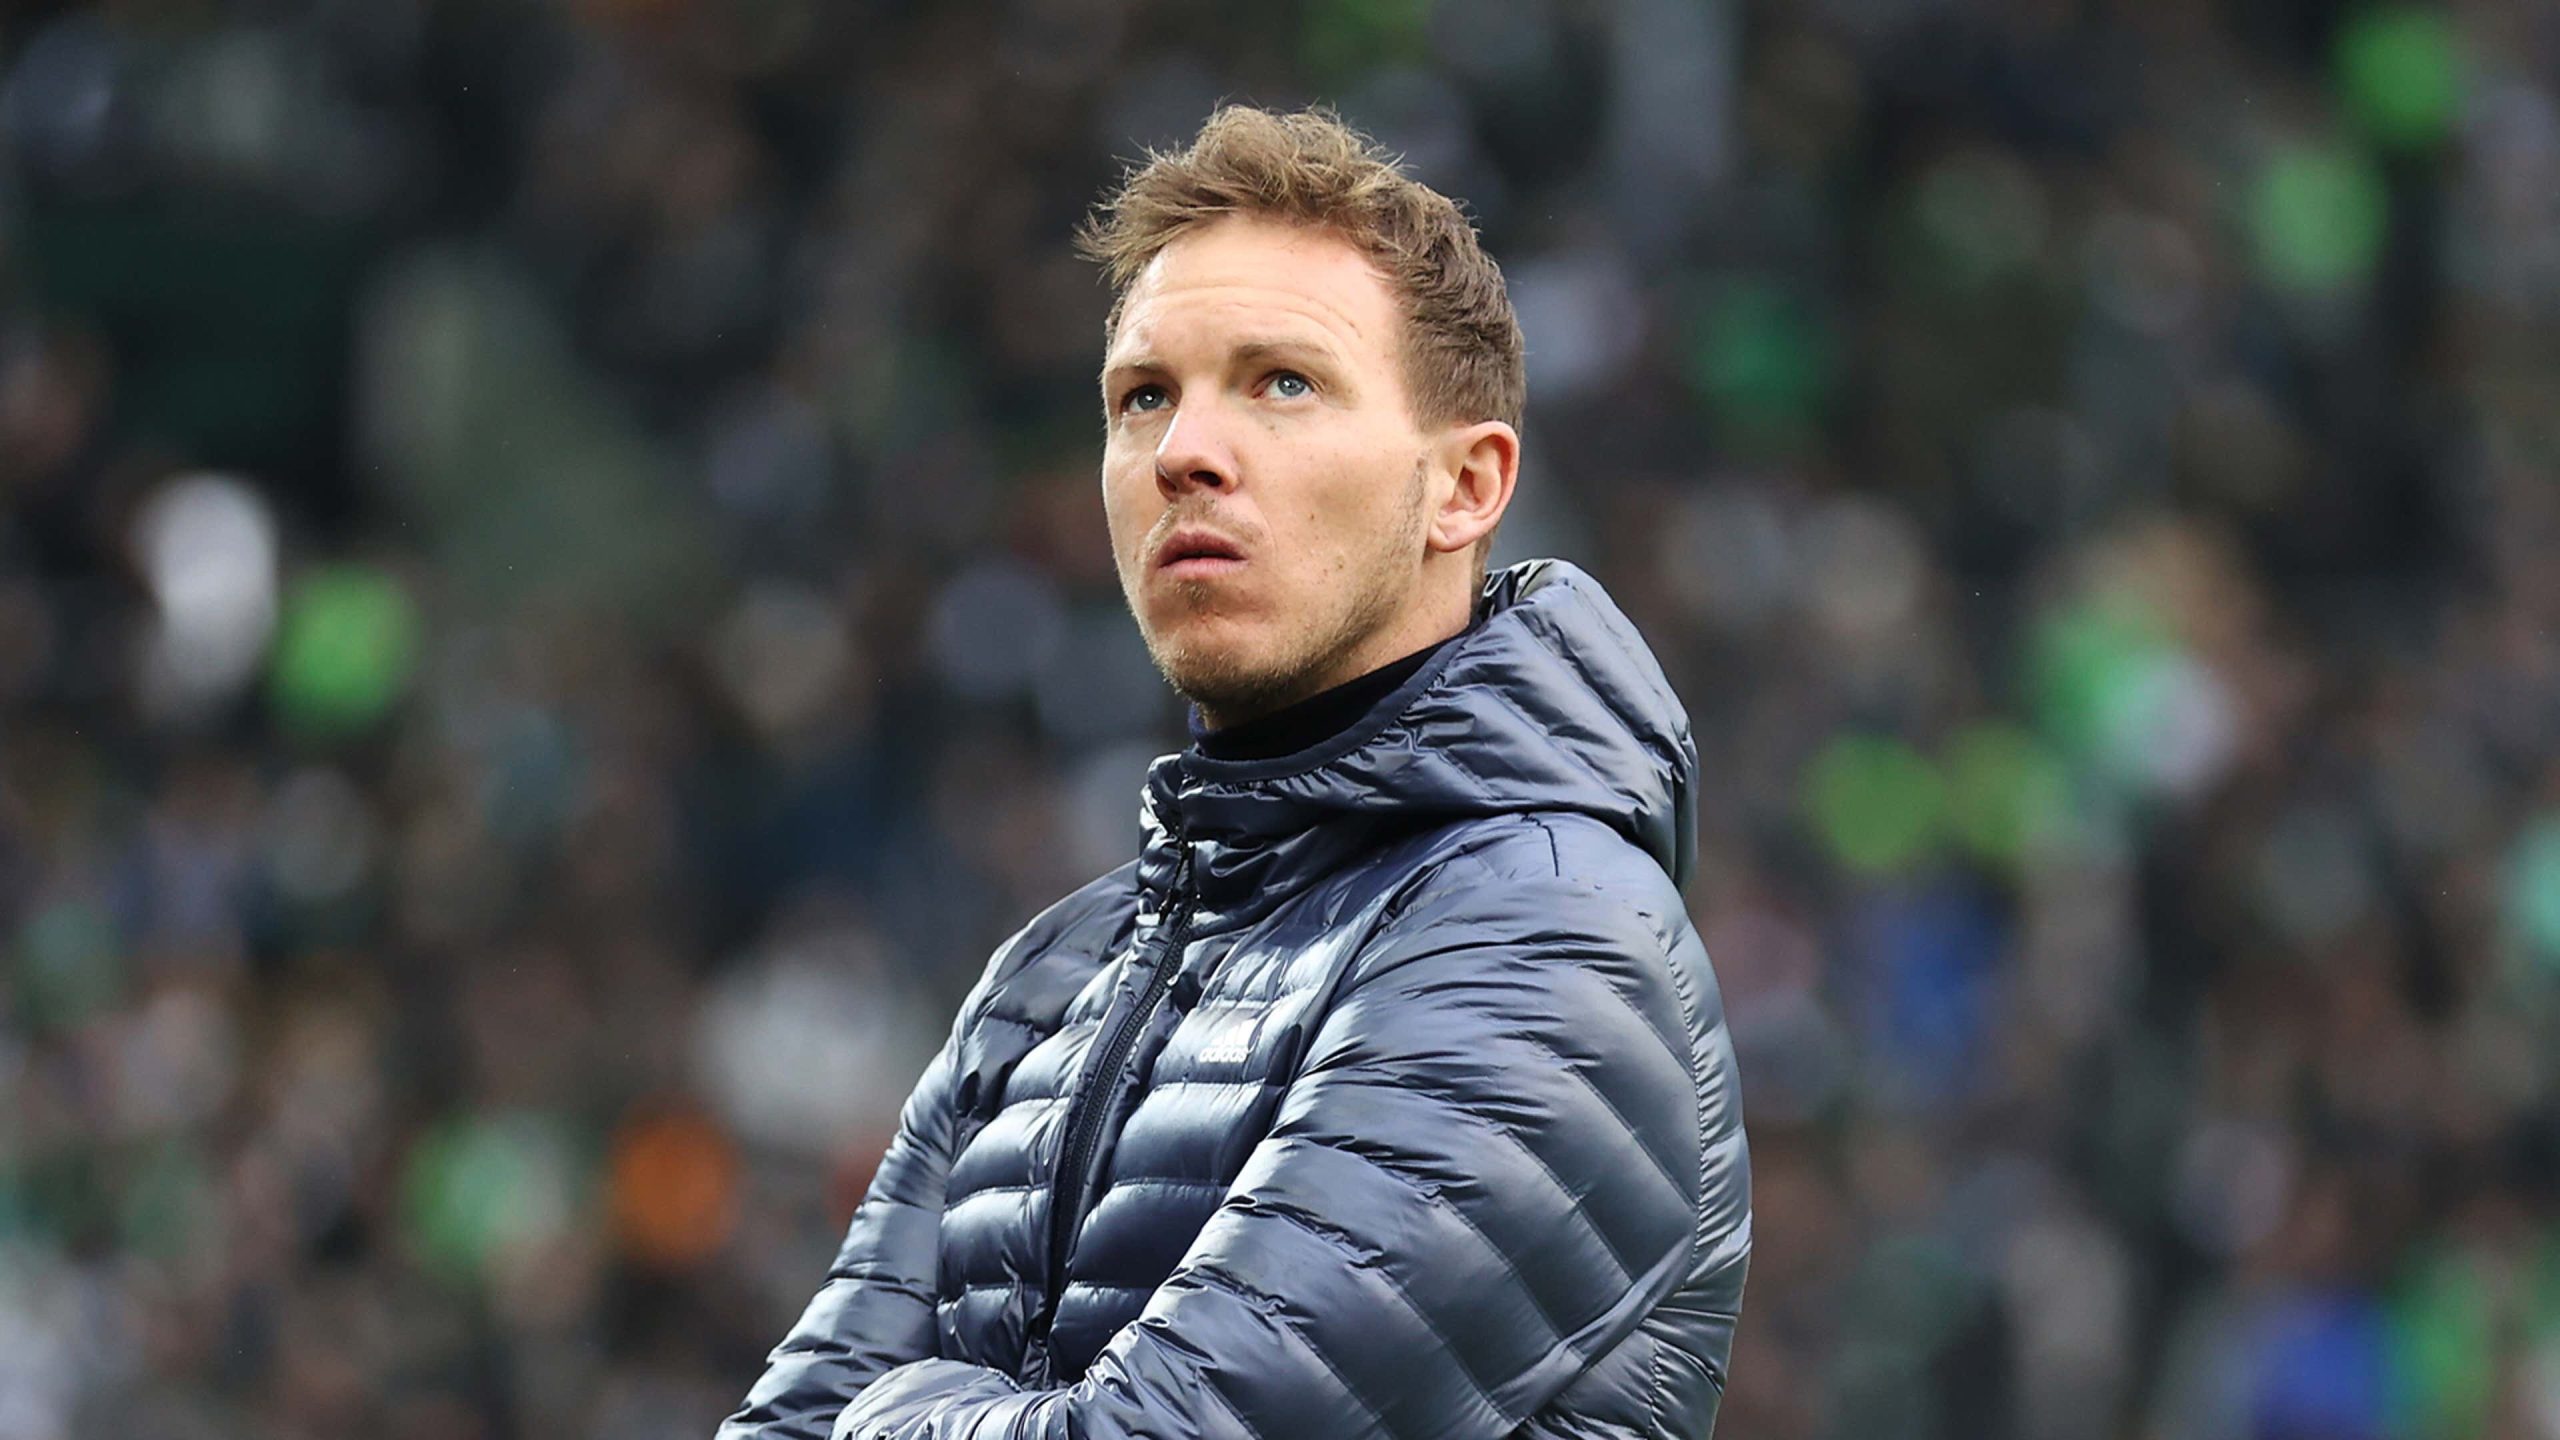 Nagelsmann as the Next Manager of Germany?